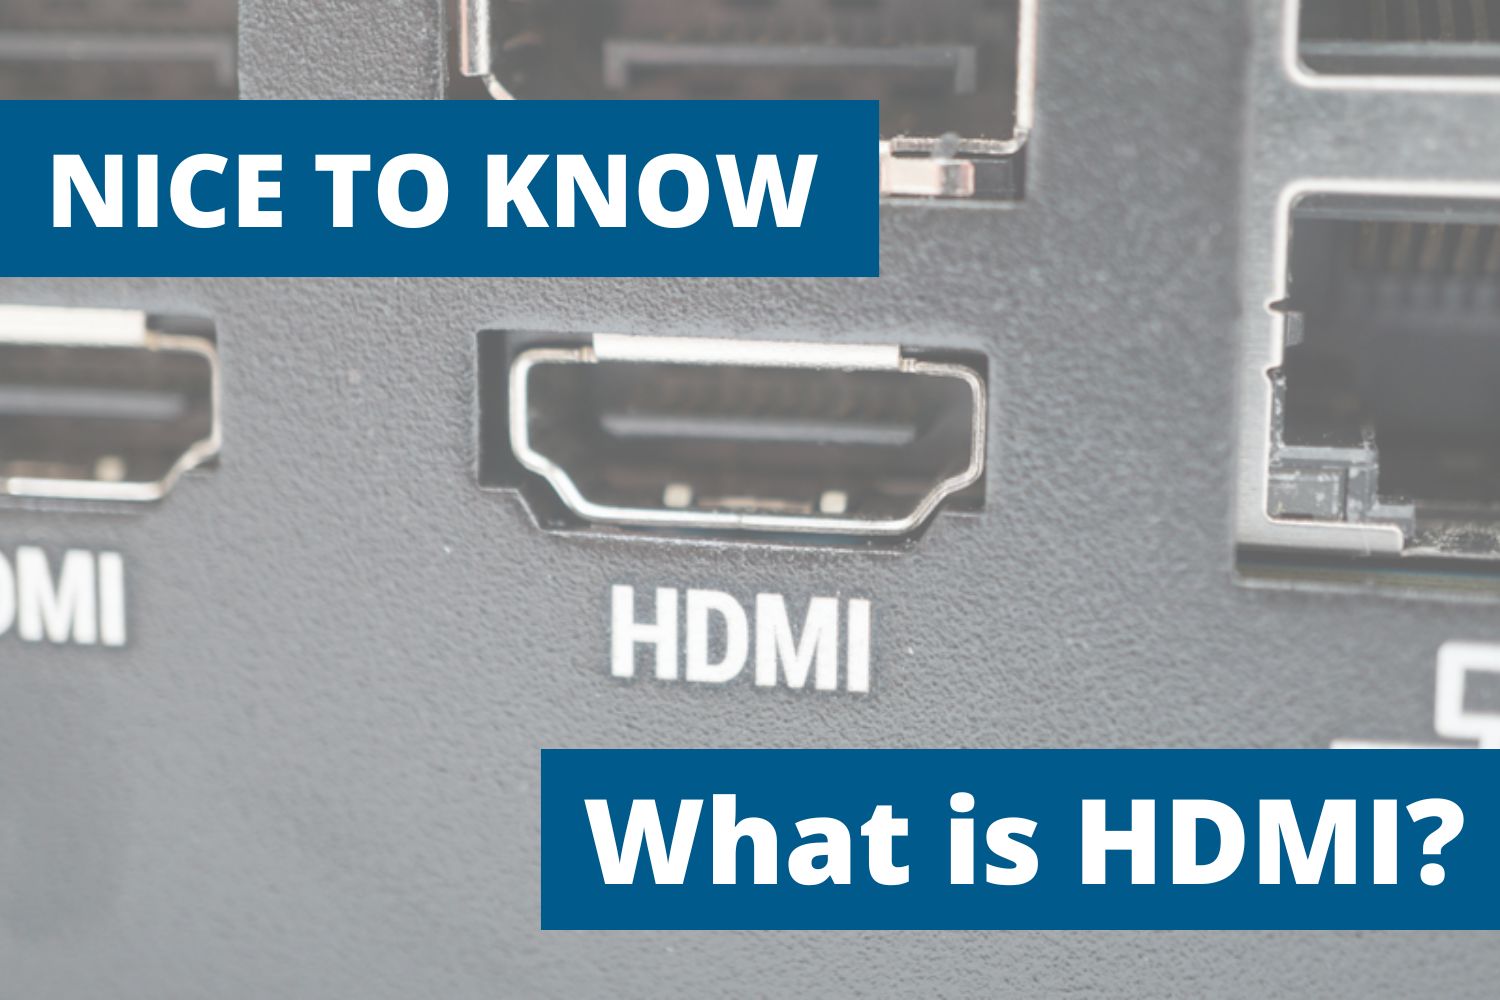 Nice to know: What is HDMI? 